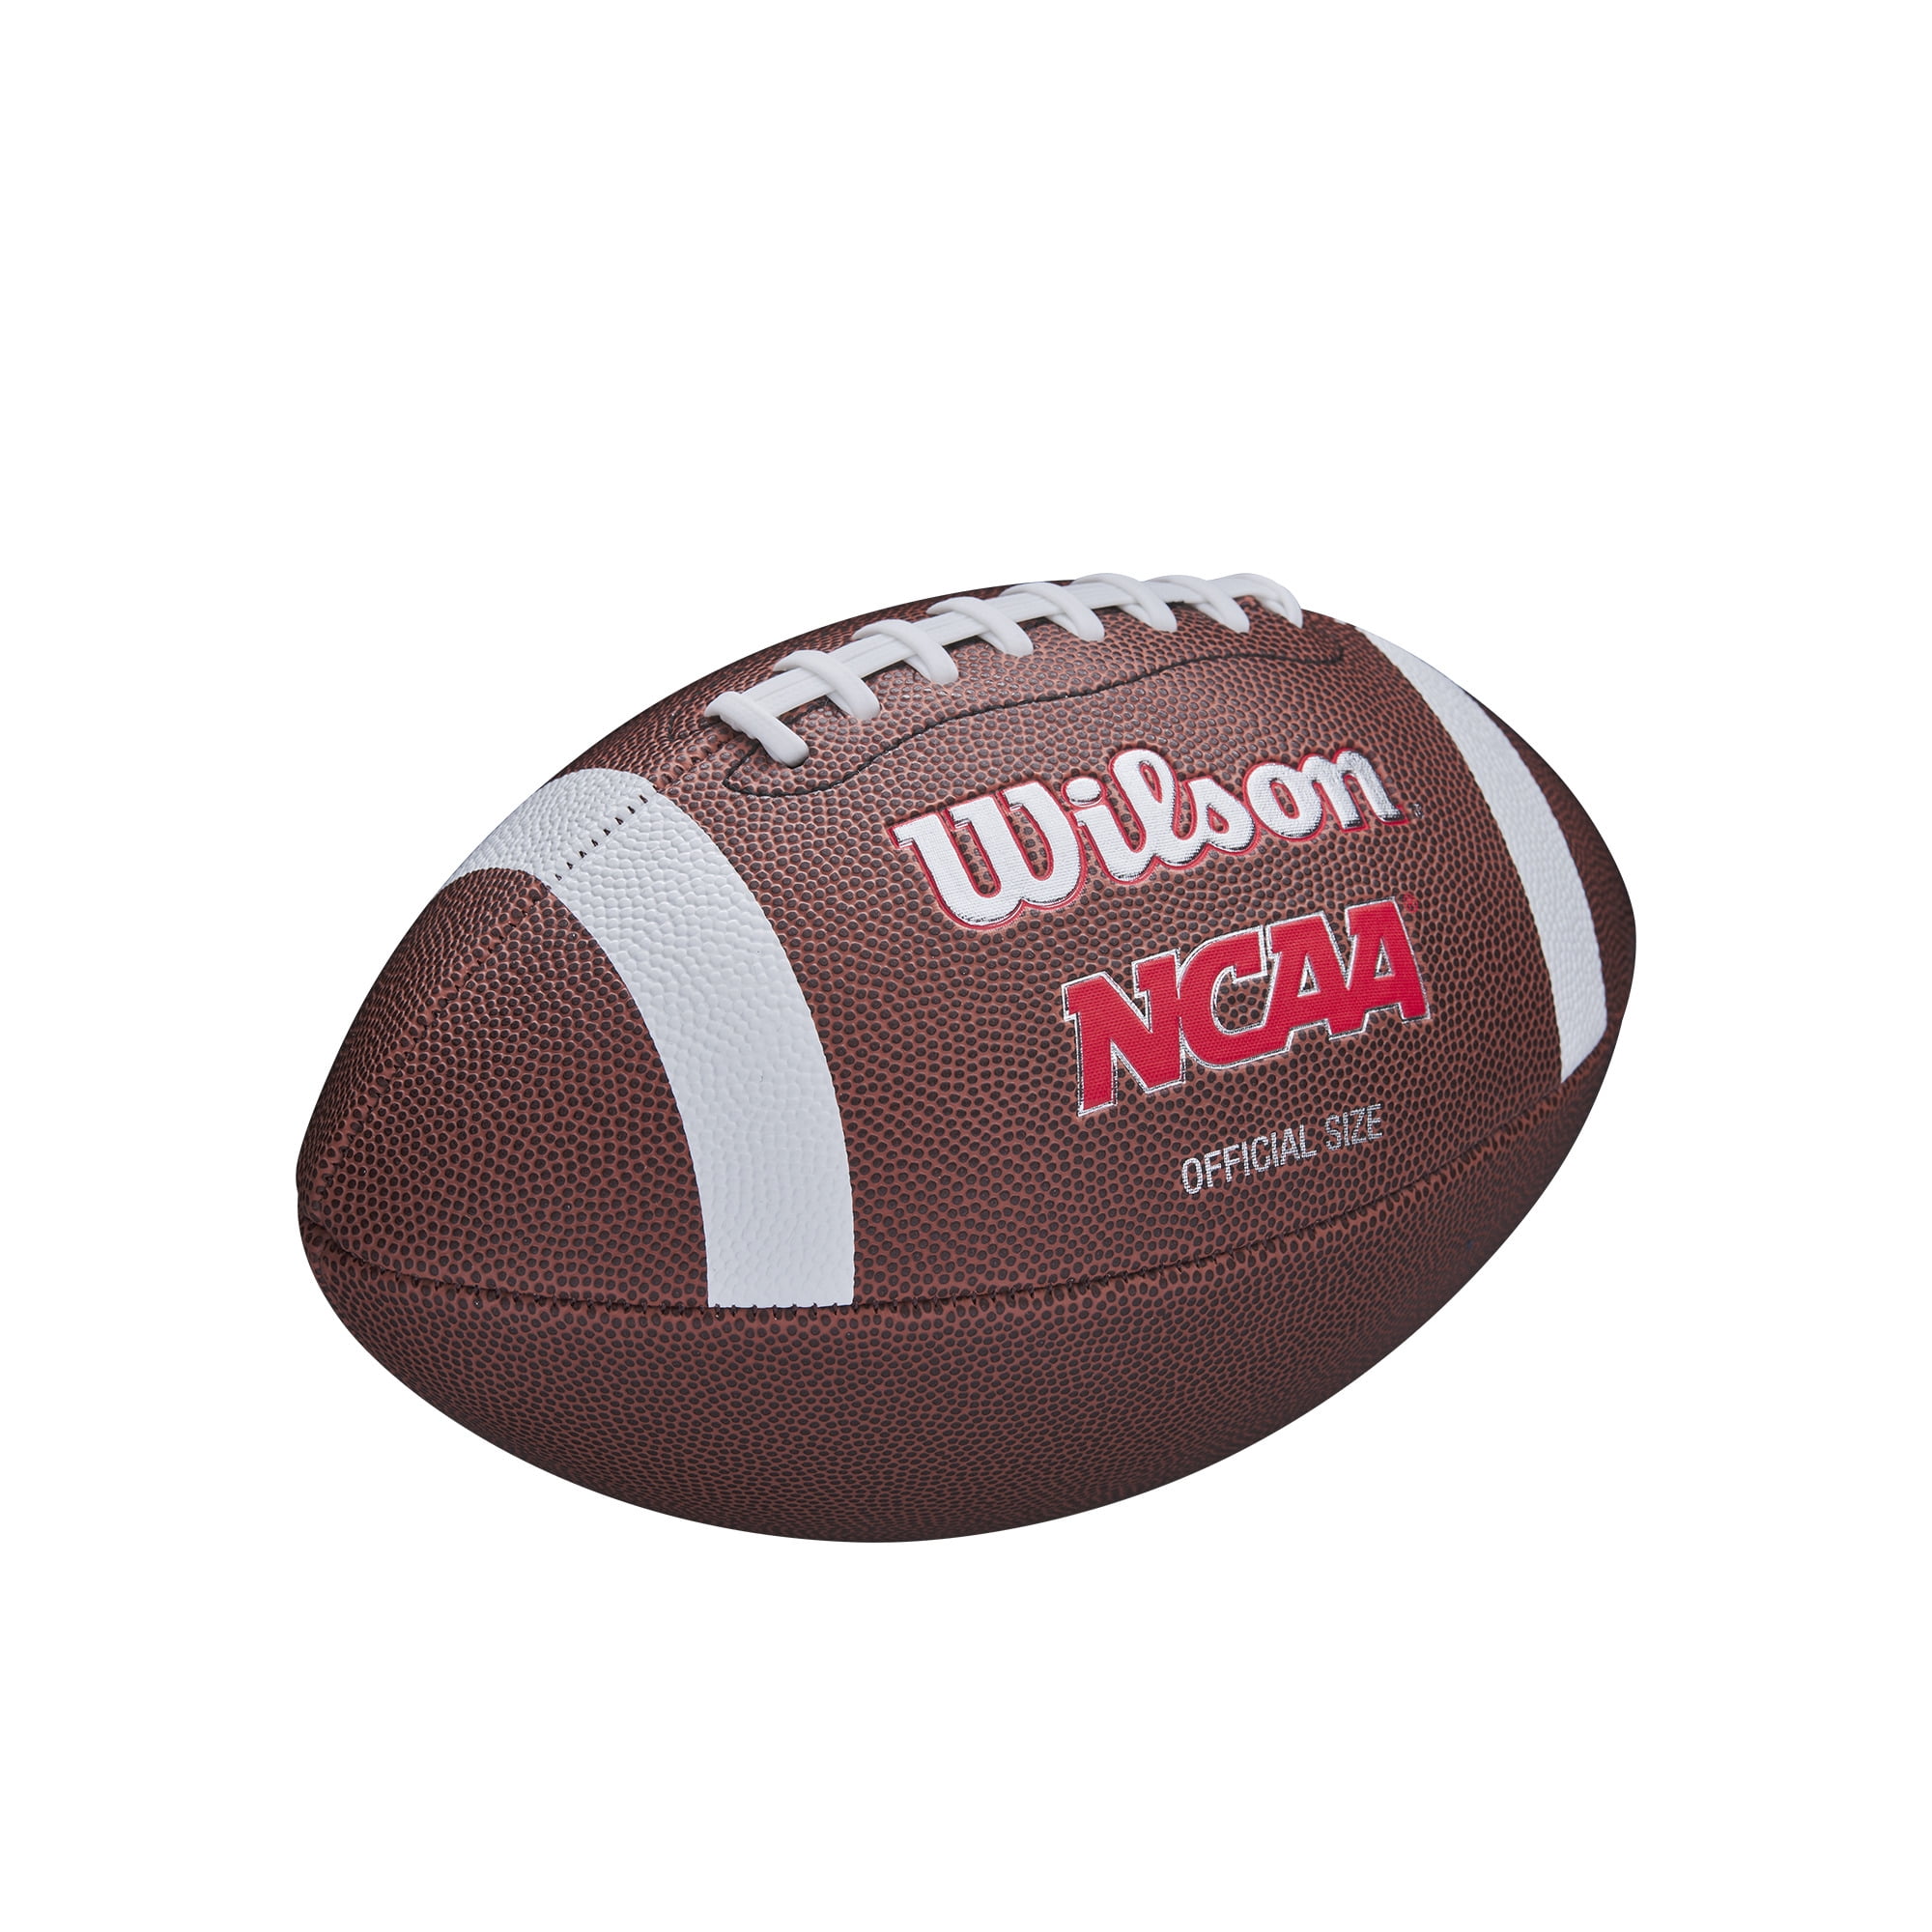 Wilson NCAA Red Zone Series Composite Football Sports & Outdoors Official Size 